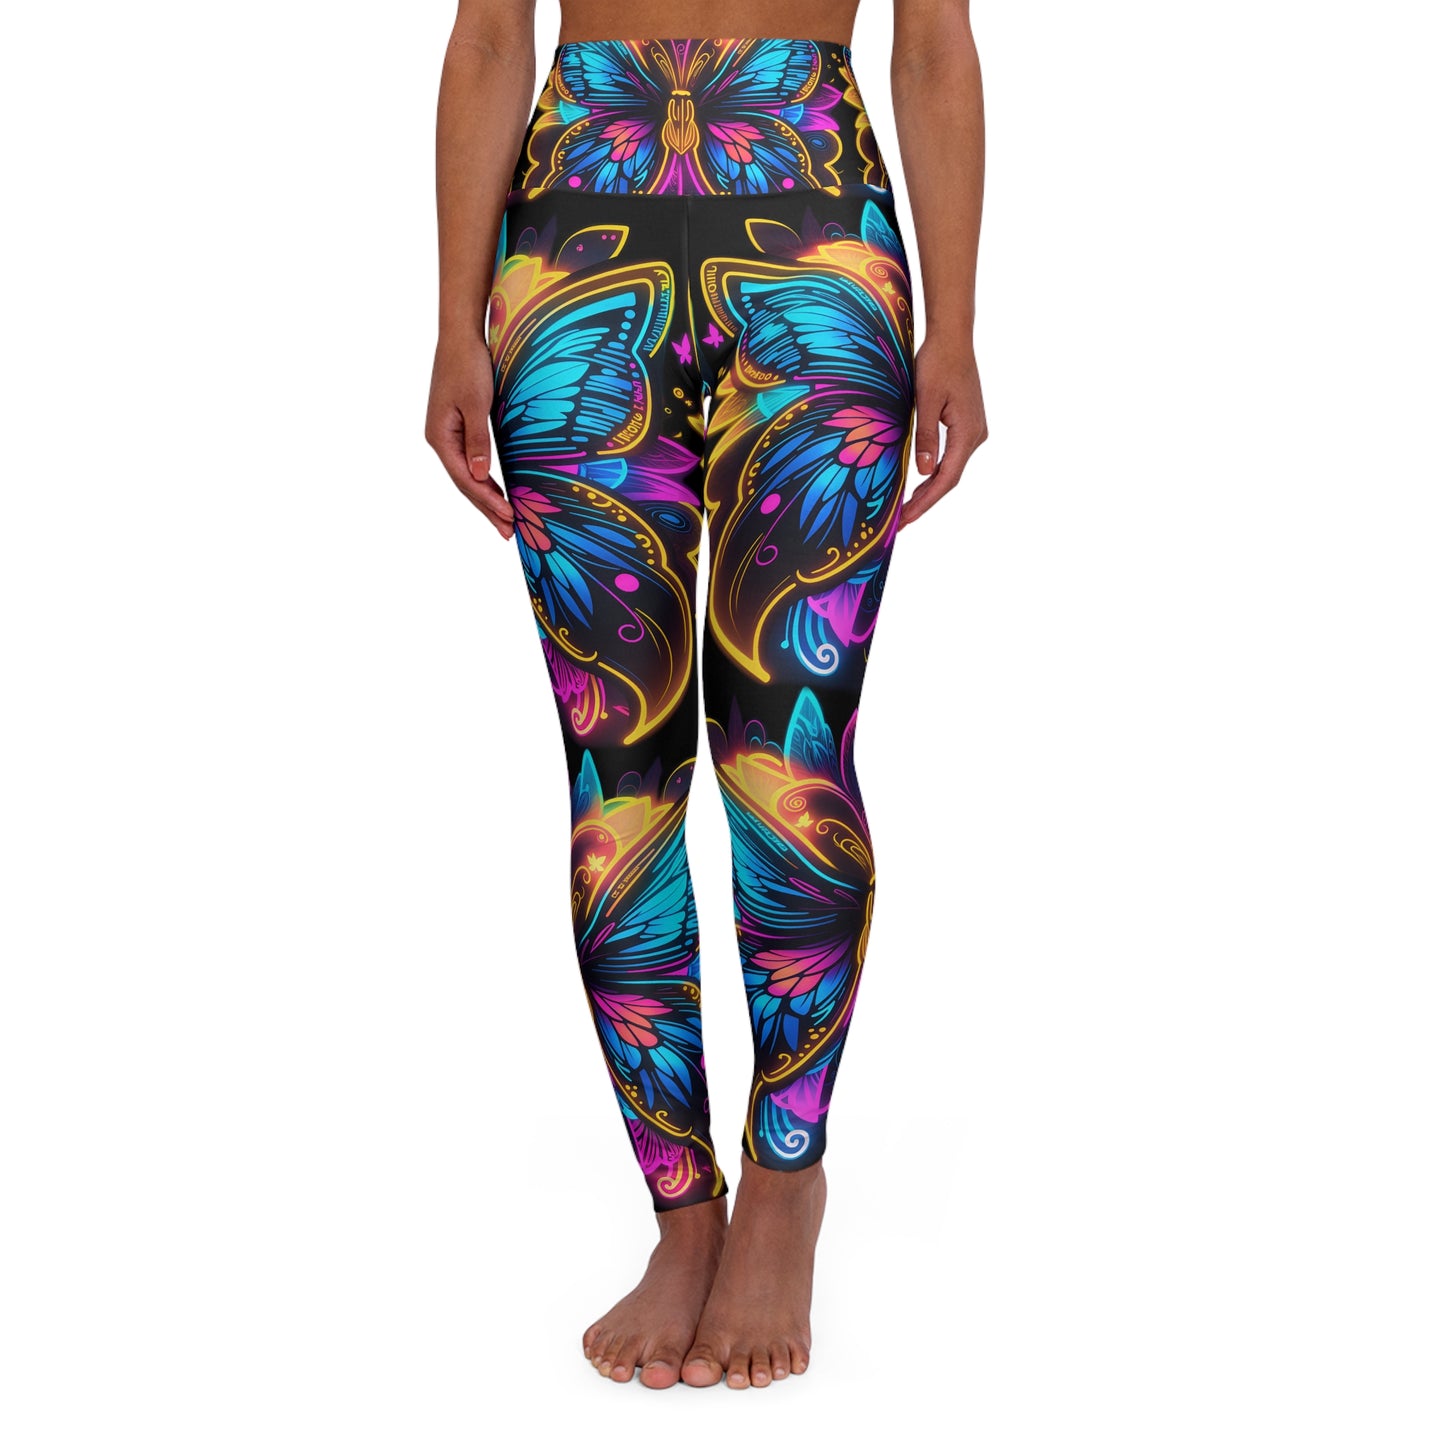 Luminous Flutter: The Neon Electric Butterfly - High Waisted Yoga Leggings